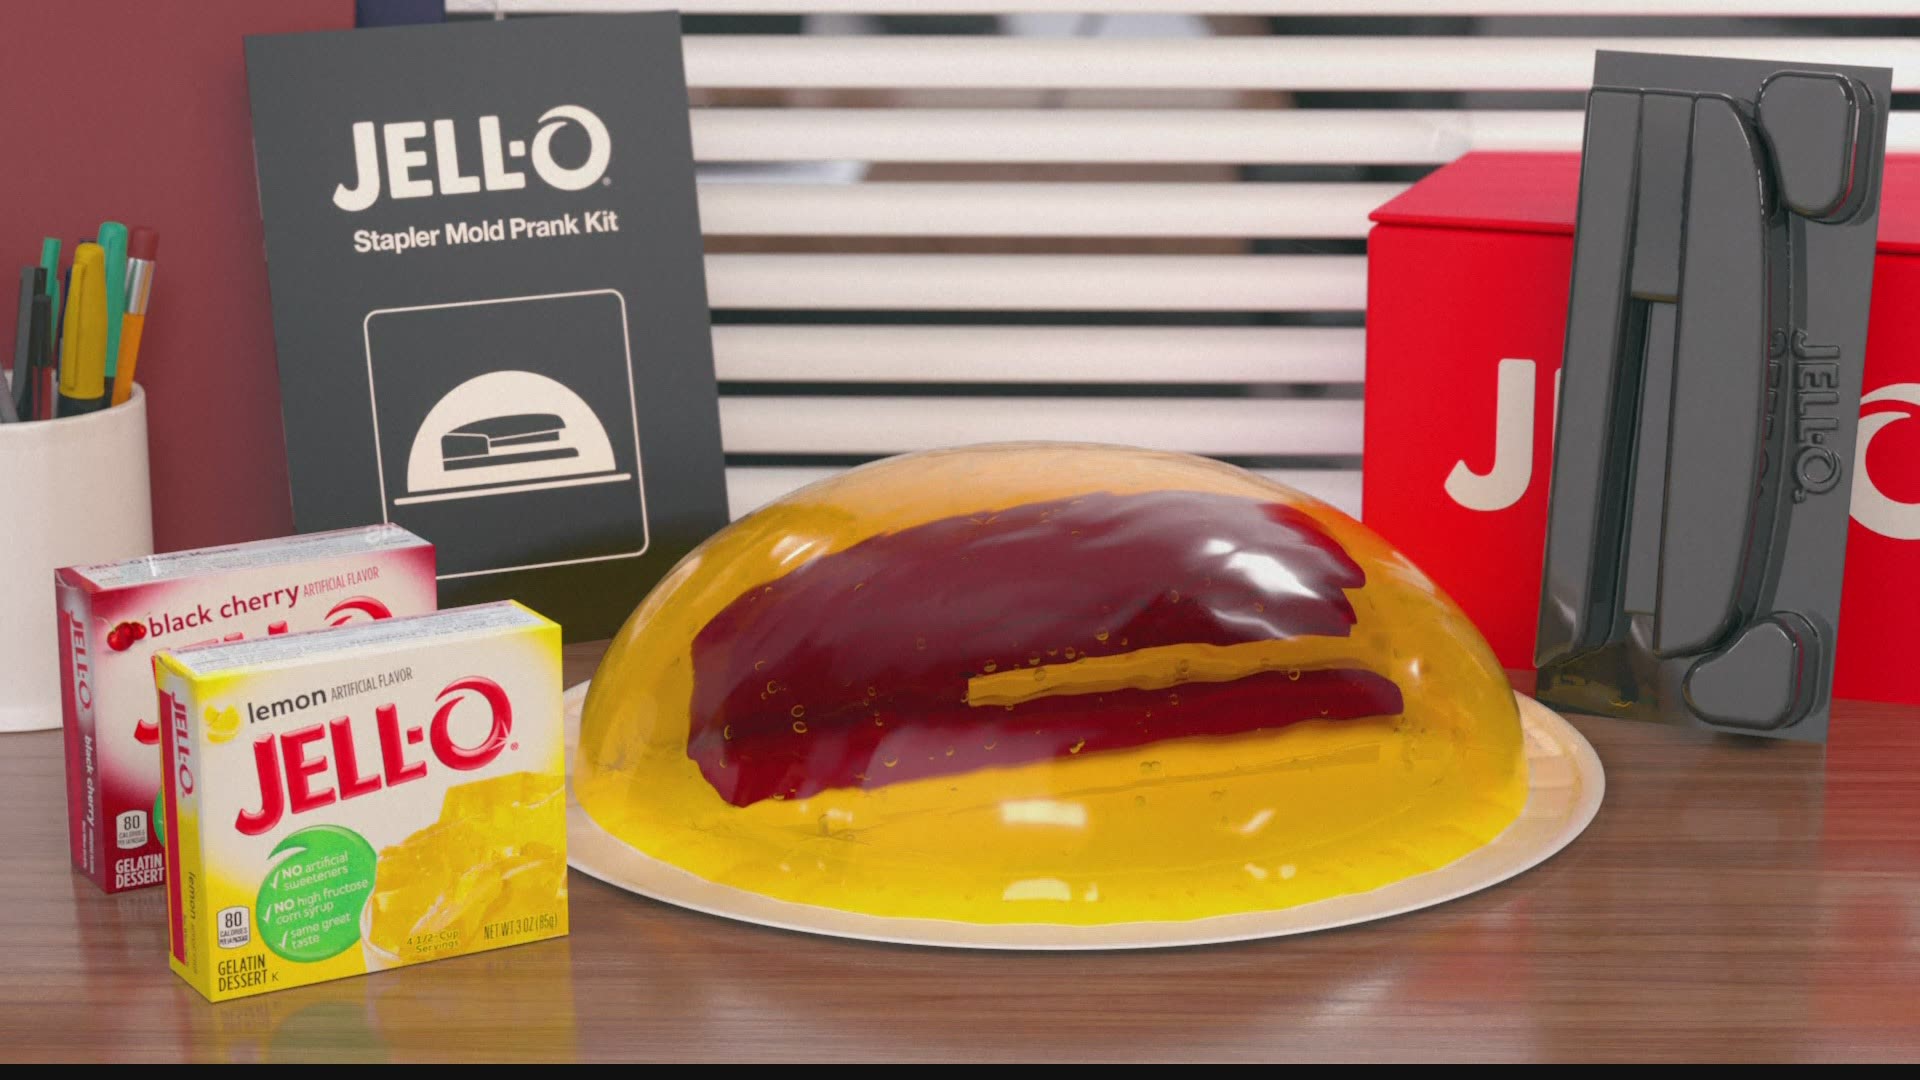 The Jell-O "gelatin mold stapler prank kit" comes with five boxes of Jell-O and instructions on how to perfectly recreate the prank.